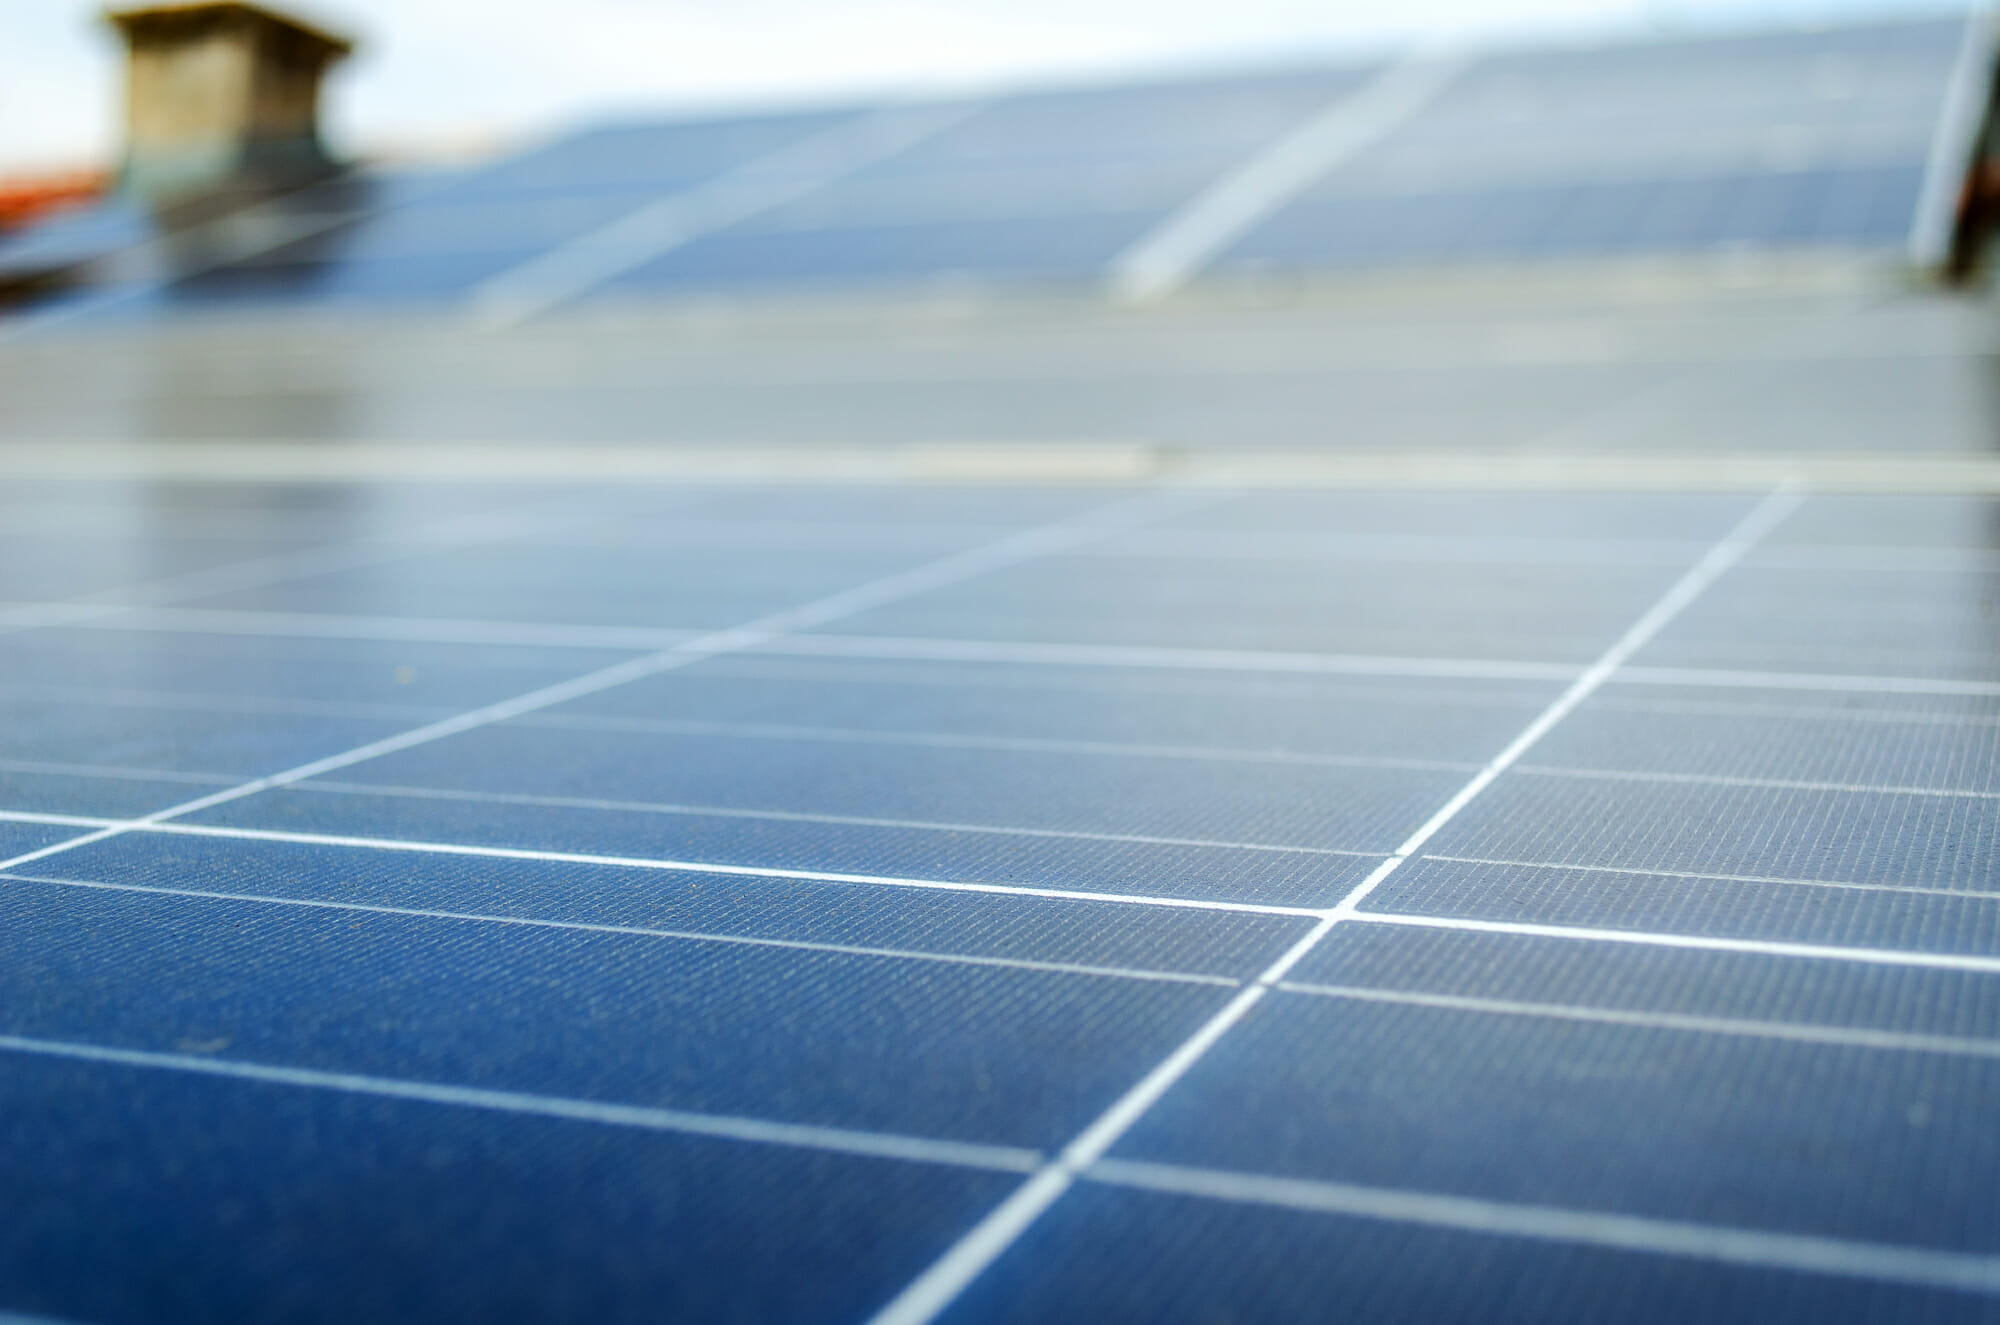 grants-rebates-and-incentives-for-solar-panels-kuby-energy